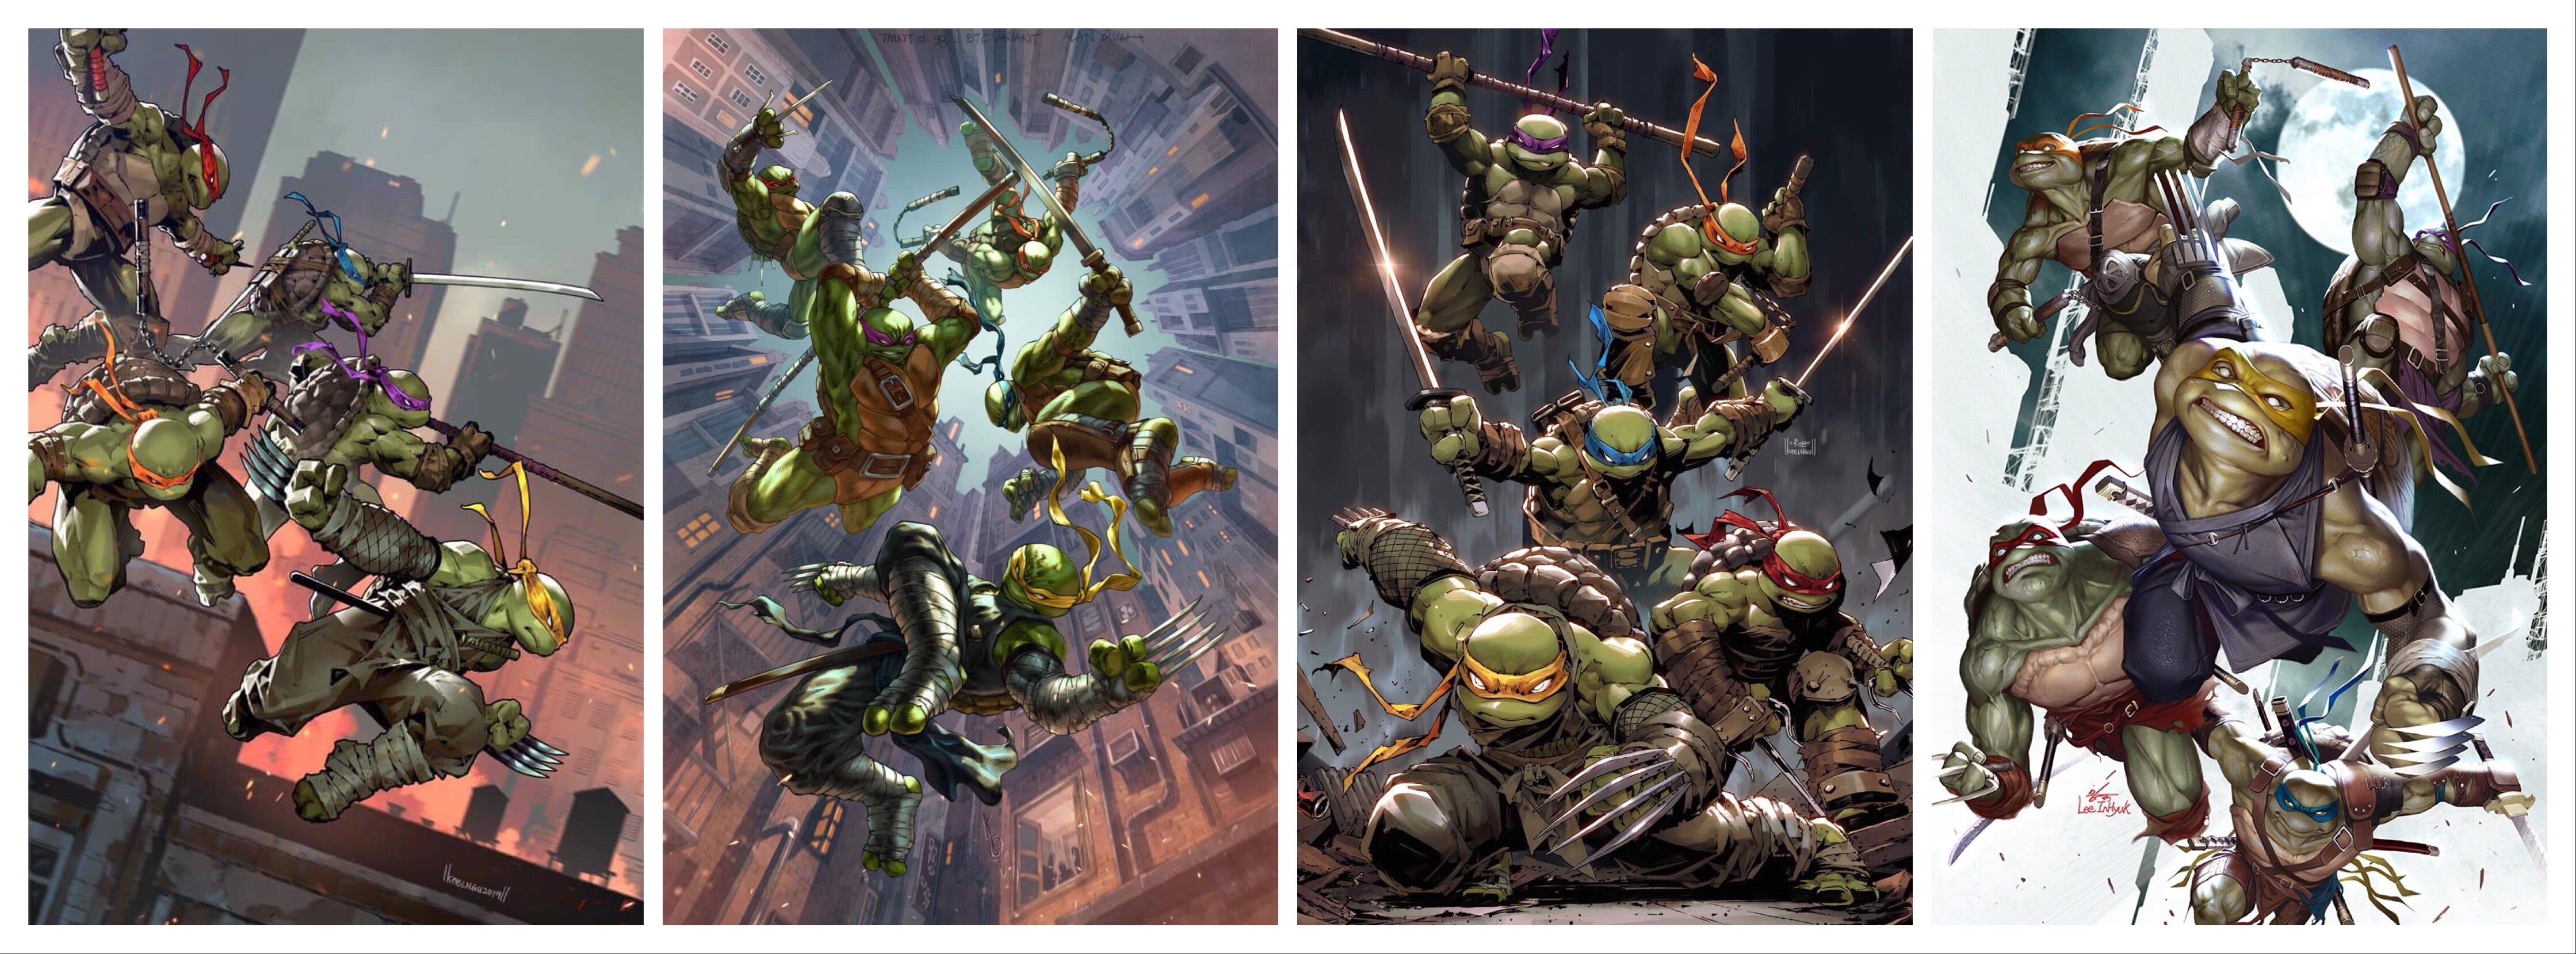 TMNT ULTIMATE 4-PACK #97 #98 #99 #100 SET LIMITED TO 50 RAW SETS